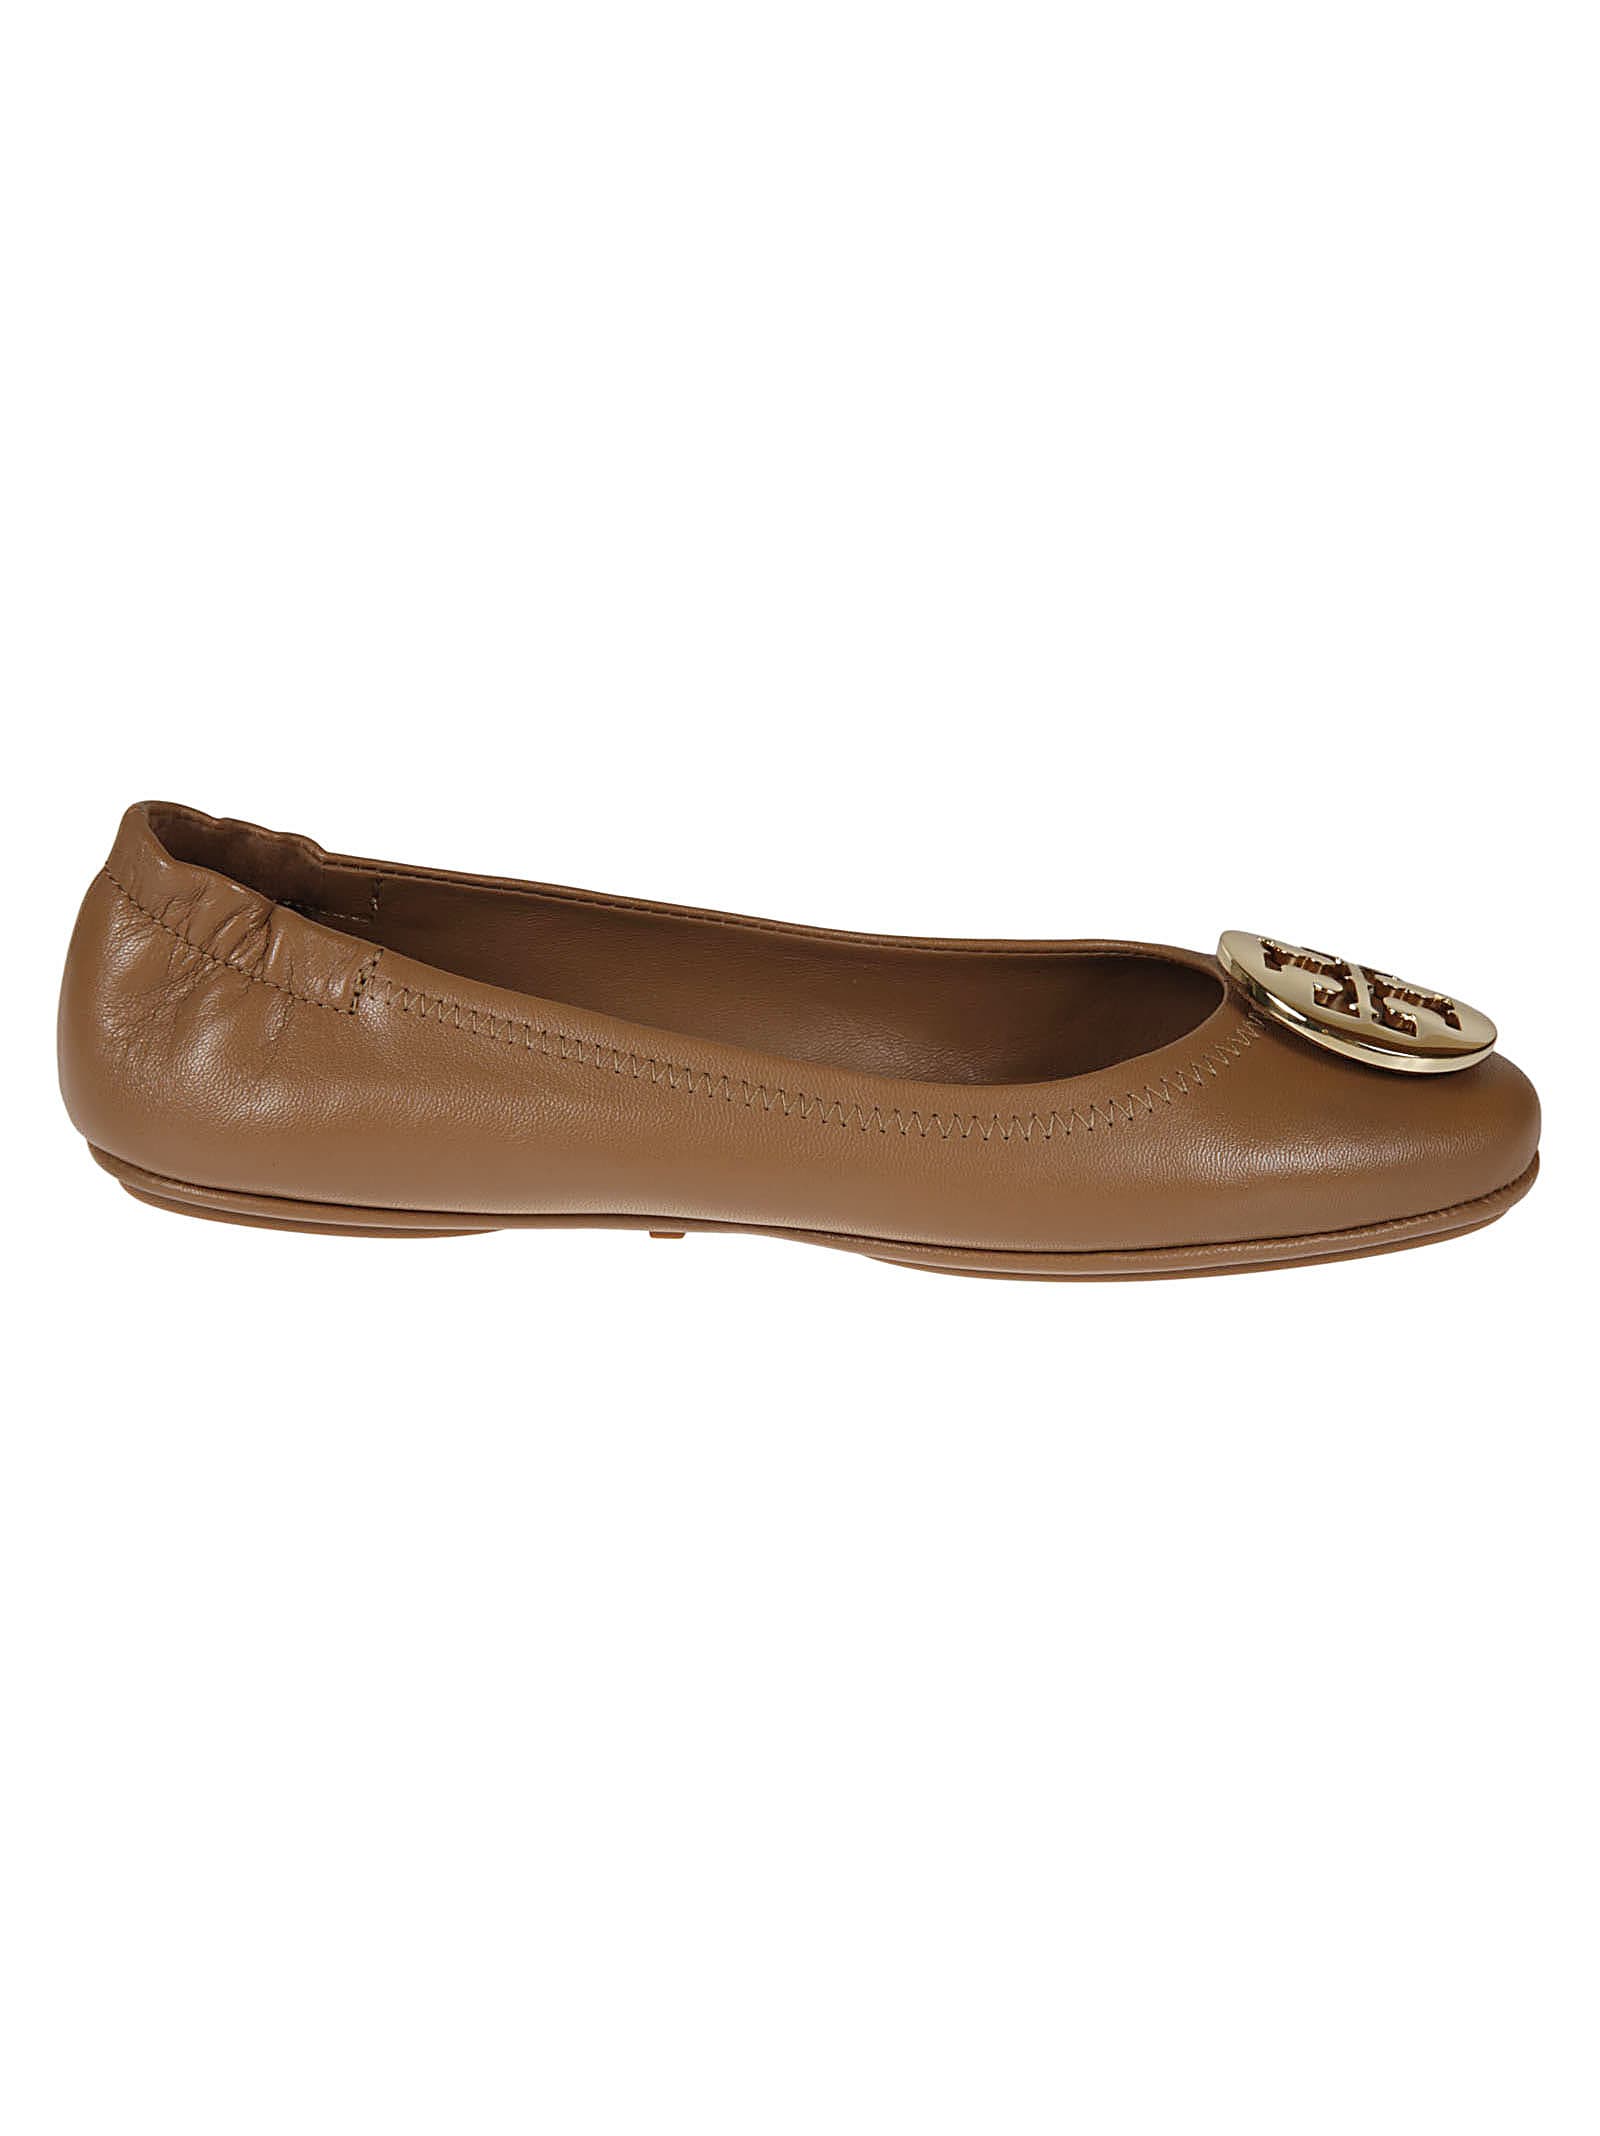 Buy Tory Burch Minnie Ballerinas online, shop Tory Burch shoes with free shipping